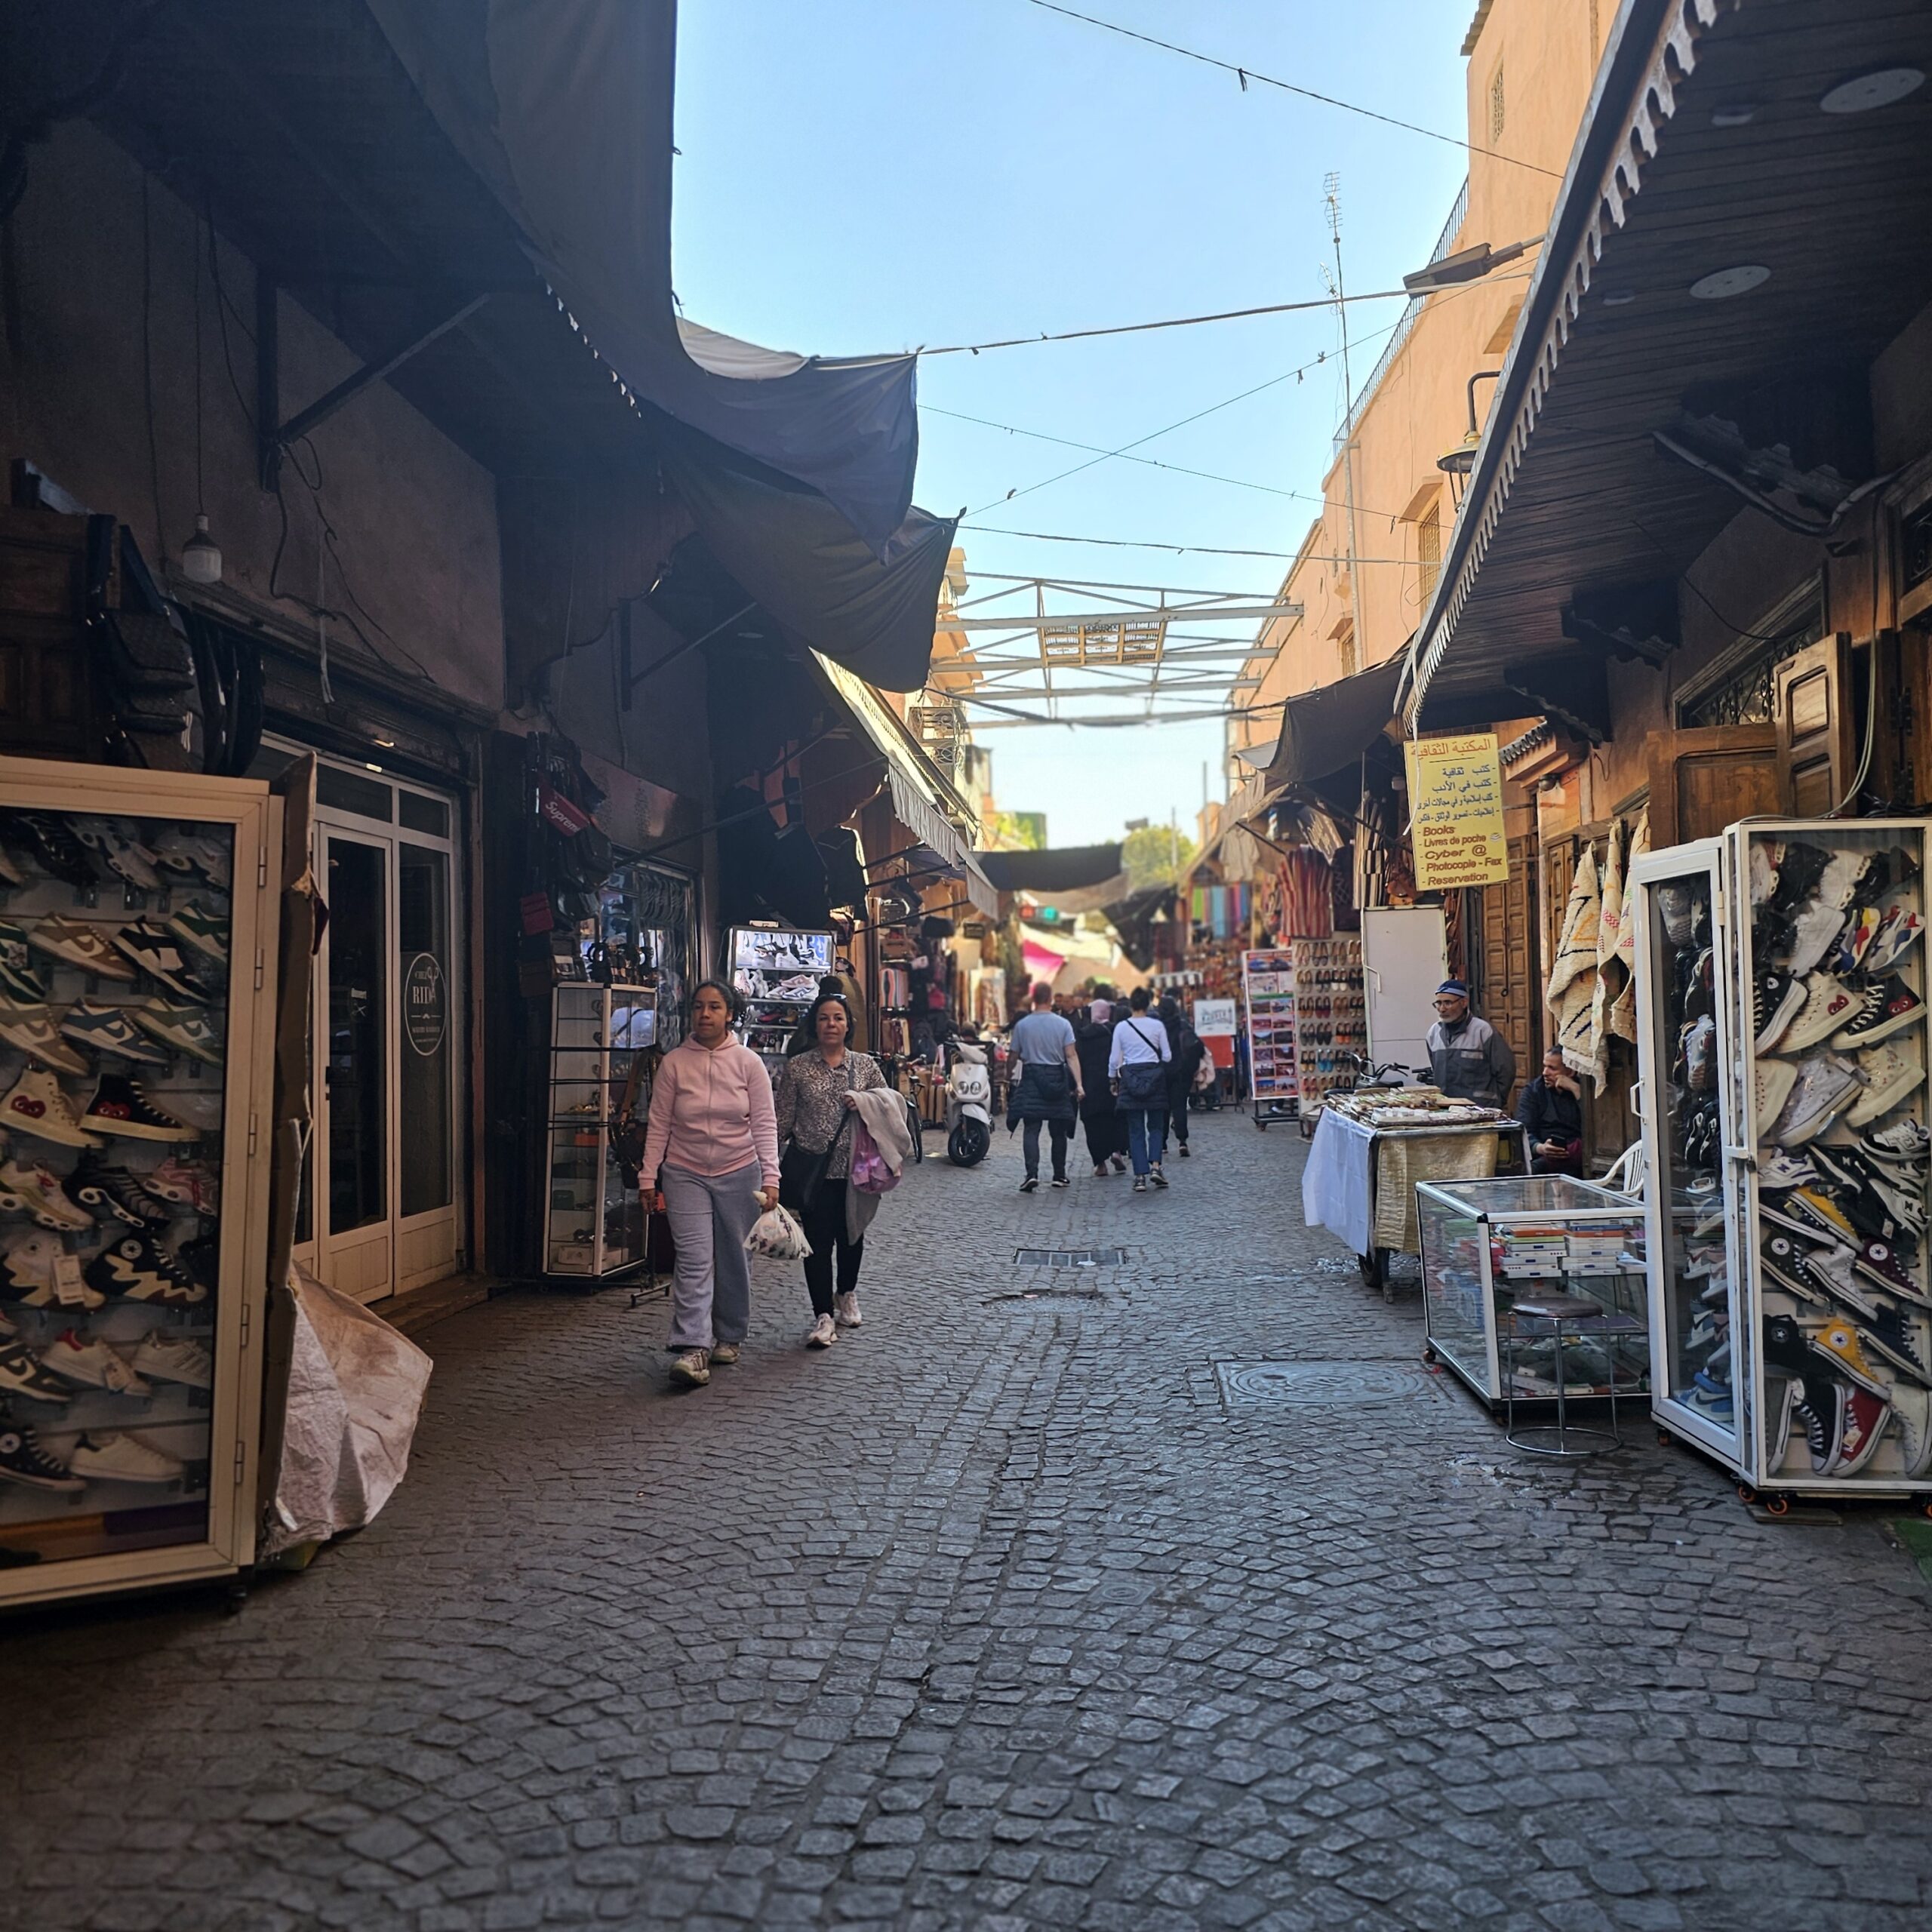 A small side street, one of many in Jemaa El Fnaa, Marrakesh. Image by 360onhistory.com